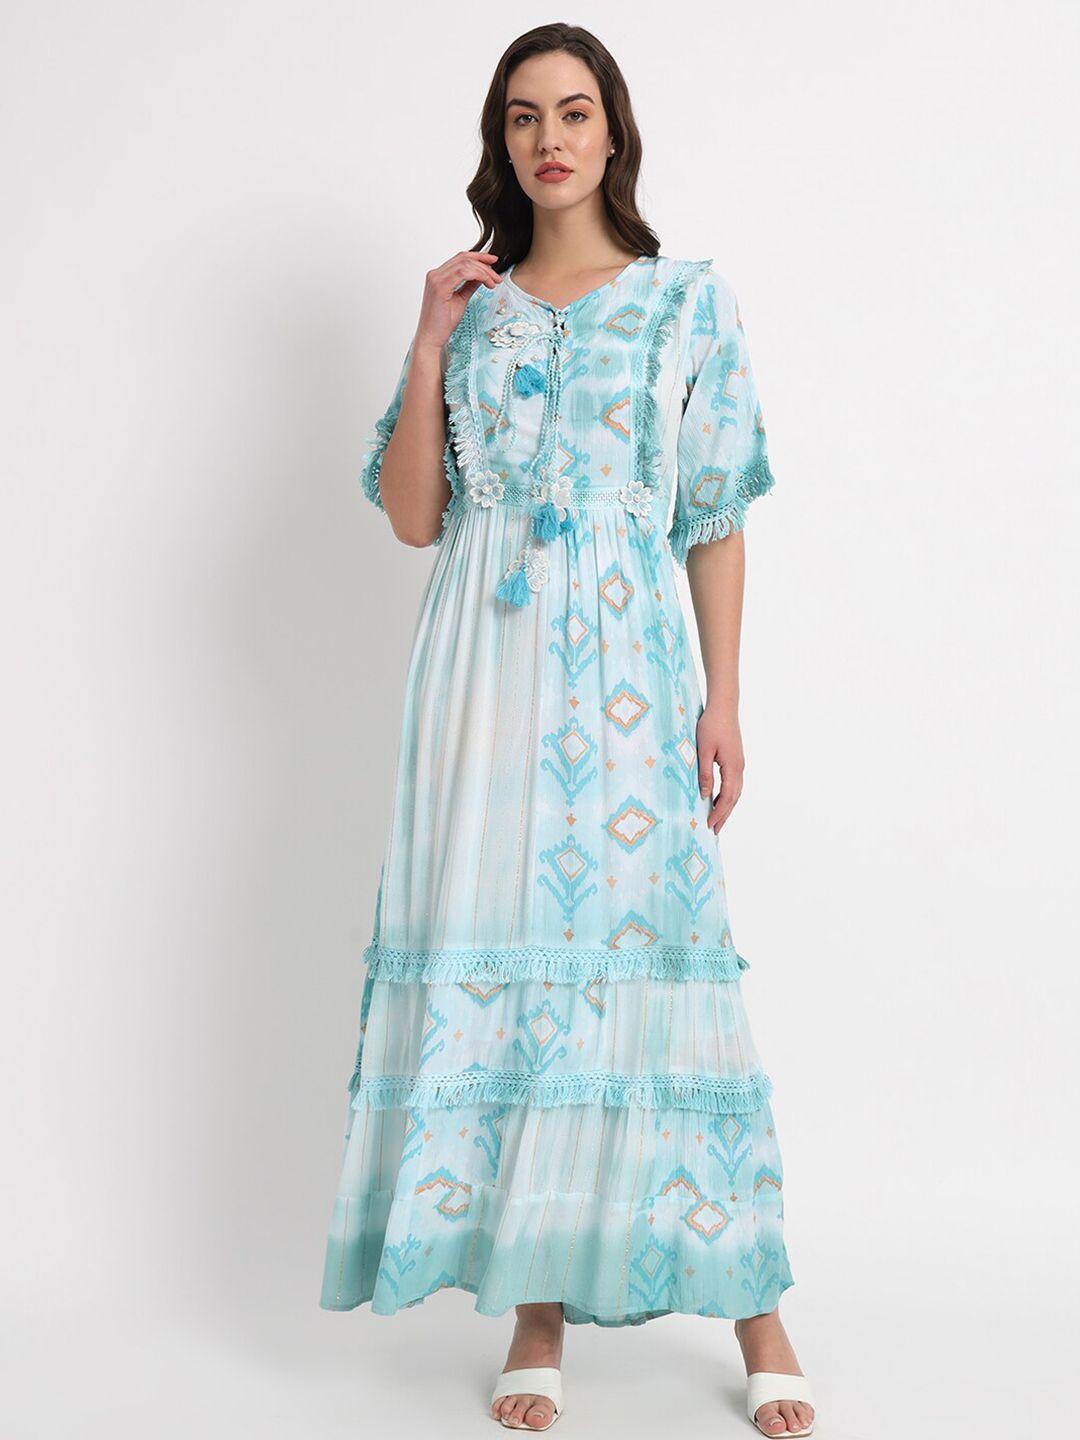 veldress blue floral embroidered fit & flare maxi dress